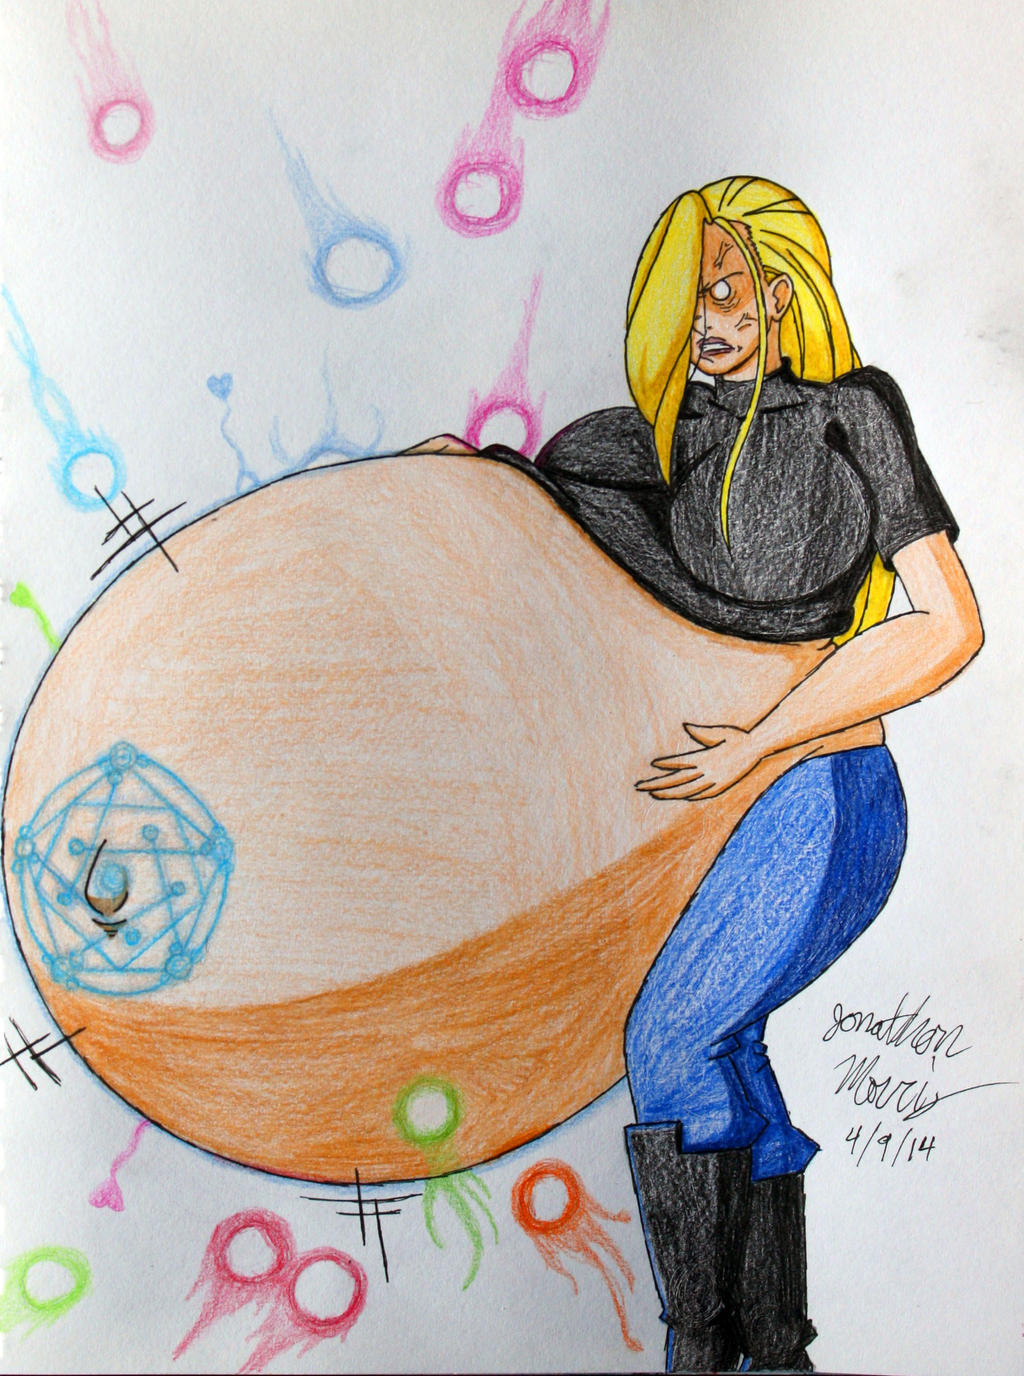 Request Angry Pregnant Olivier Armstrong By JAM4077 On DeviantArt.